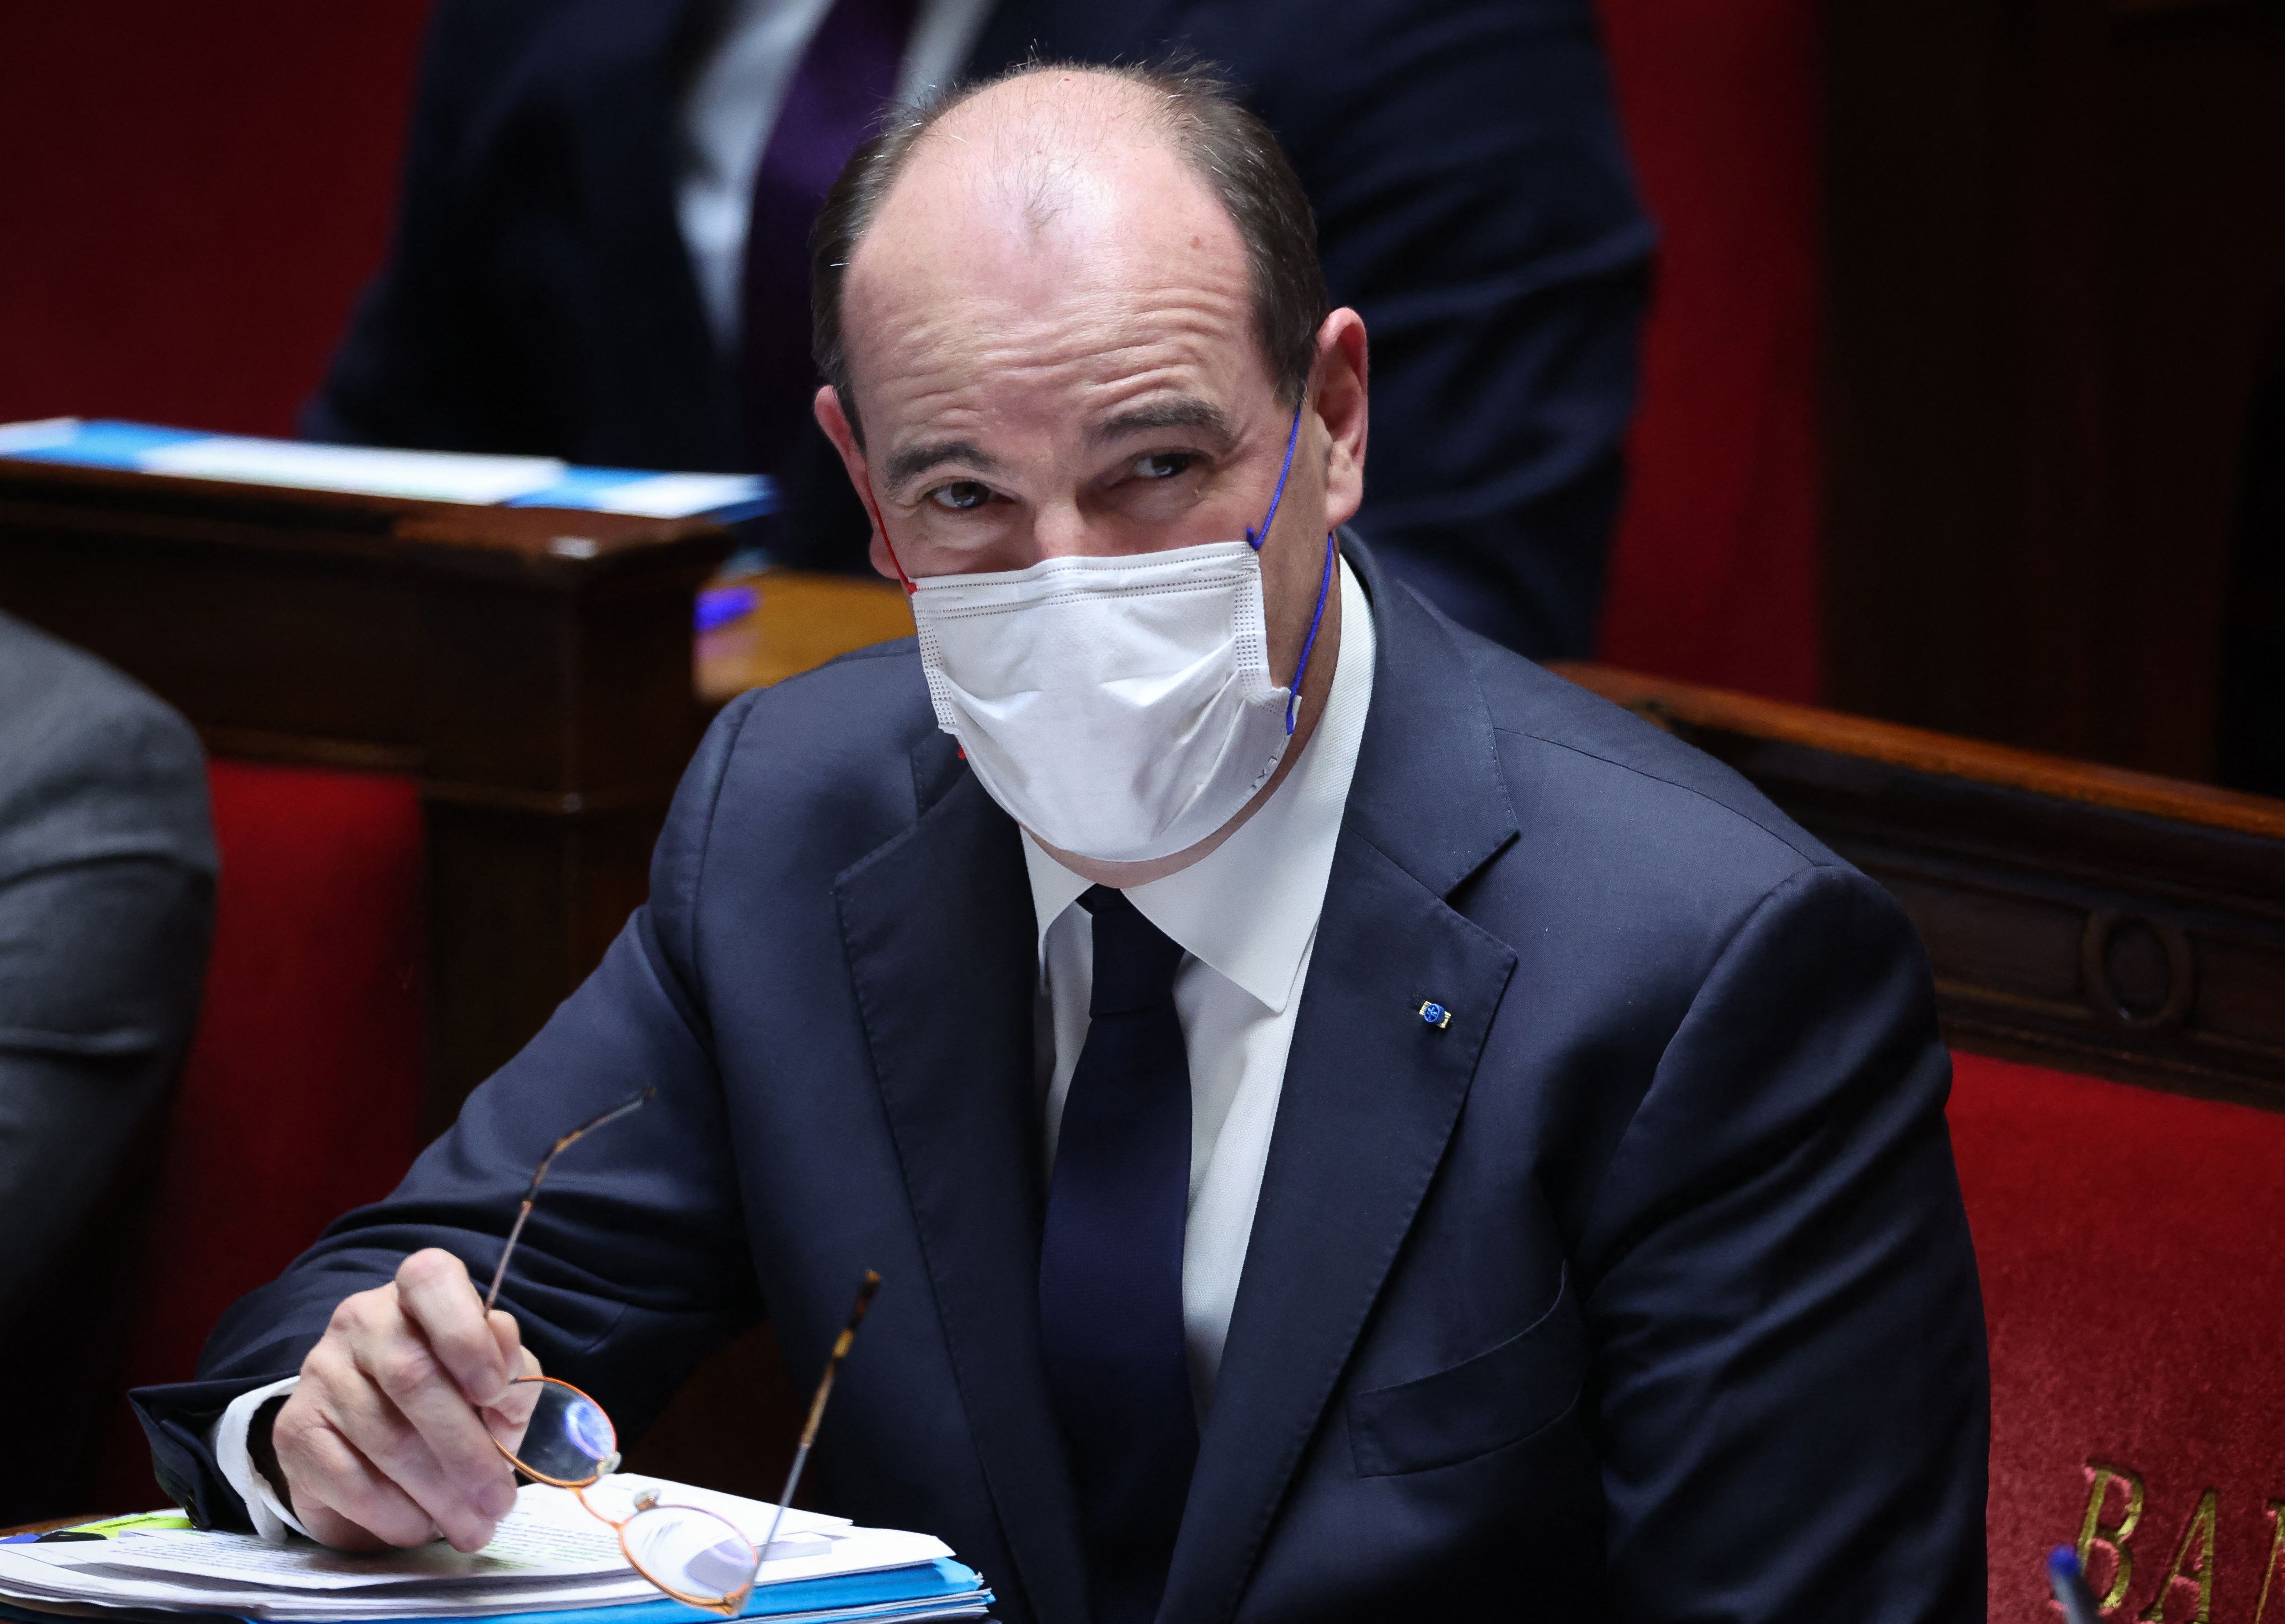 French Prime Minister Jean Castex attends a session of questions to the government at the French National Assembly in Paris, France, on February 22.